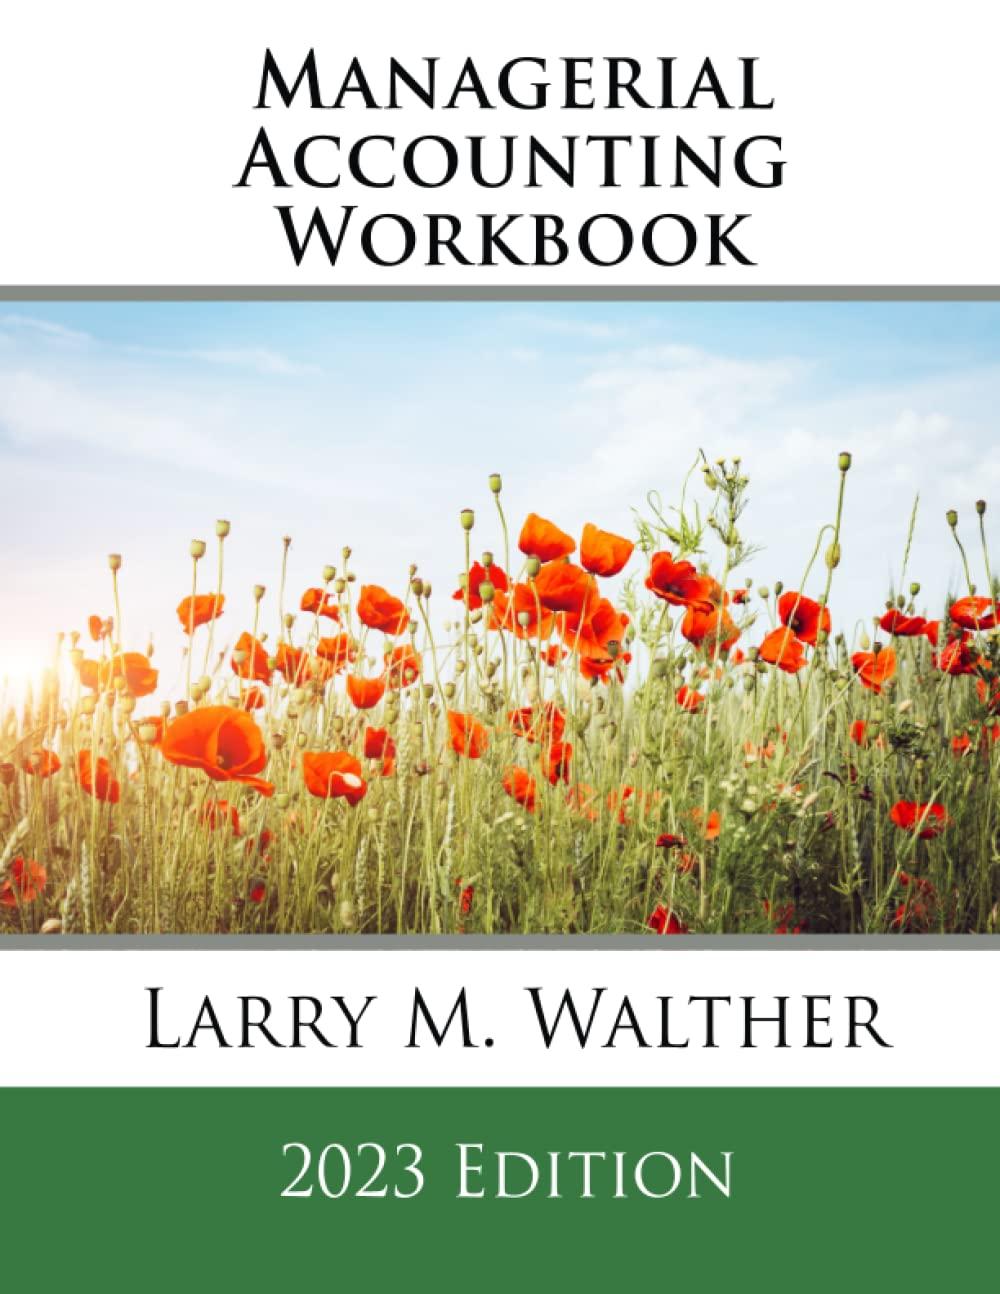 managerial accounting workbook 2023th edition larry m. walther 8379212926, 979-8379212926